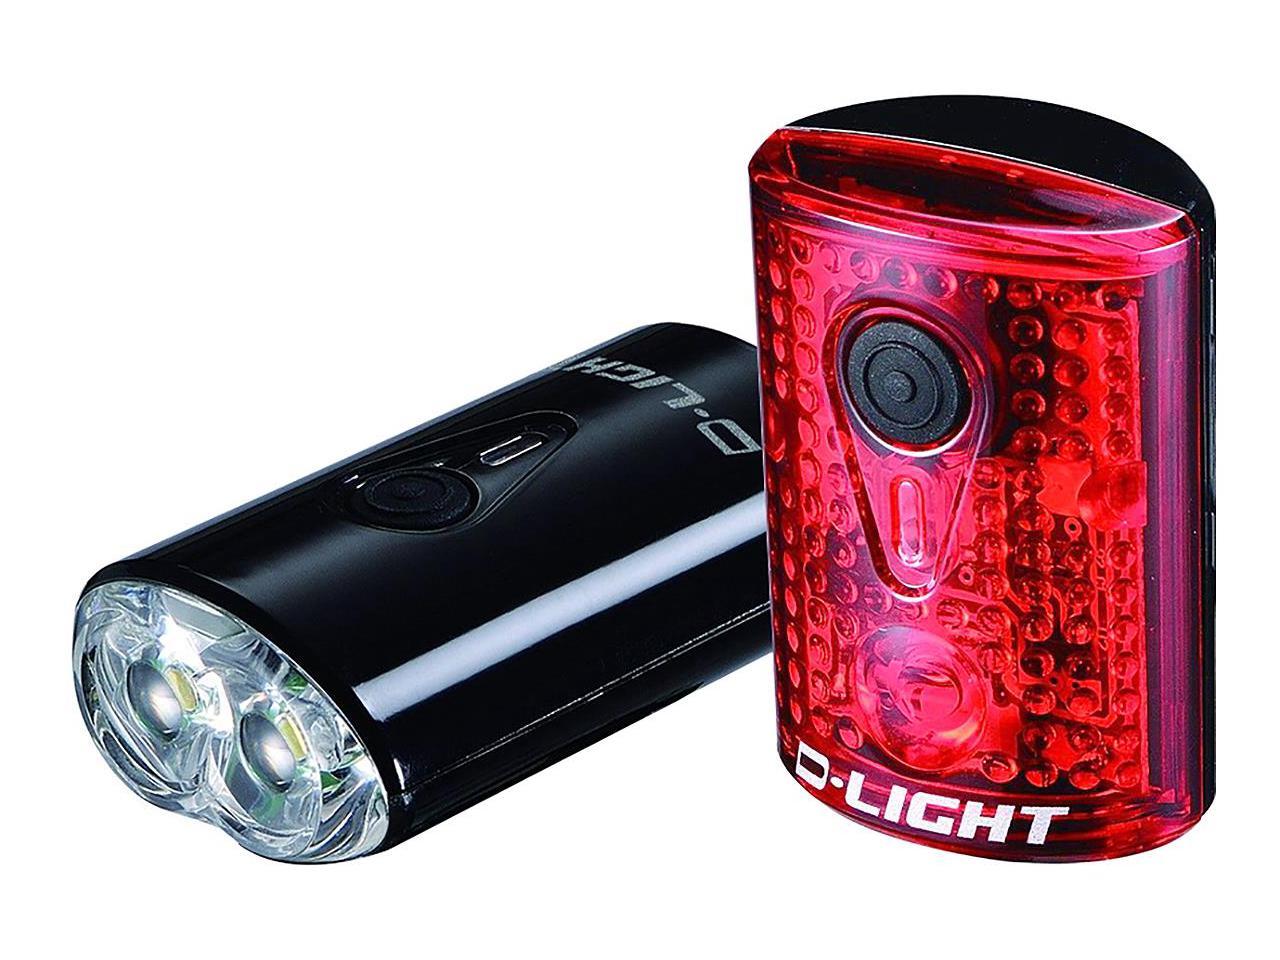 EyezOff USB Rechargeable LED Bicycle Lights Front/Rear Set